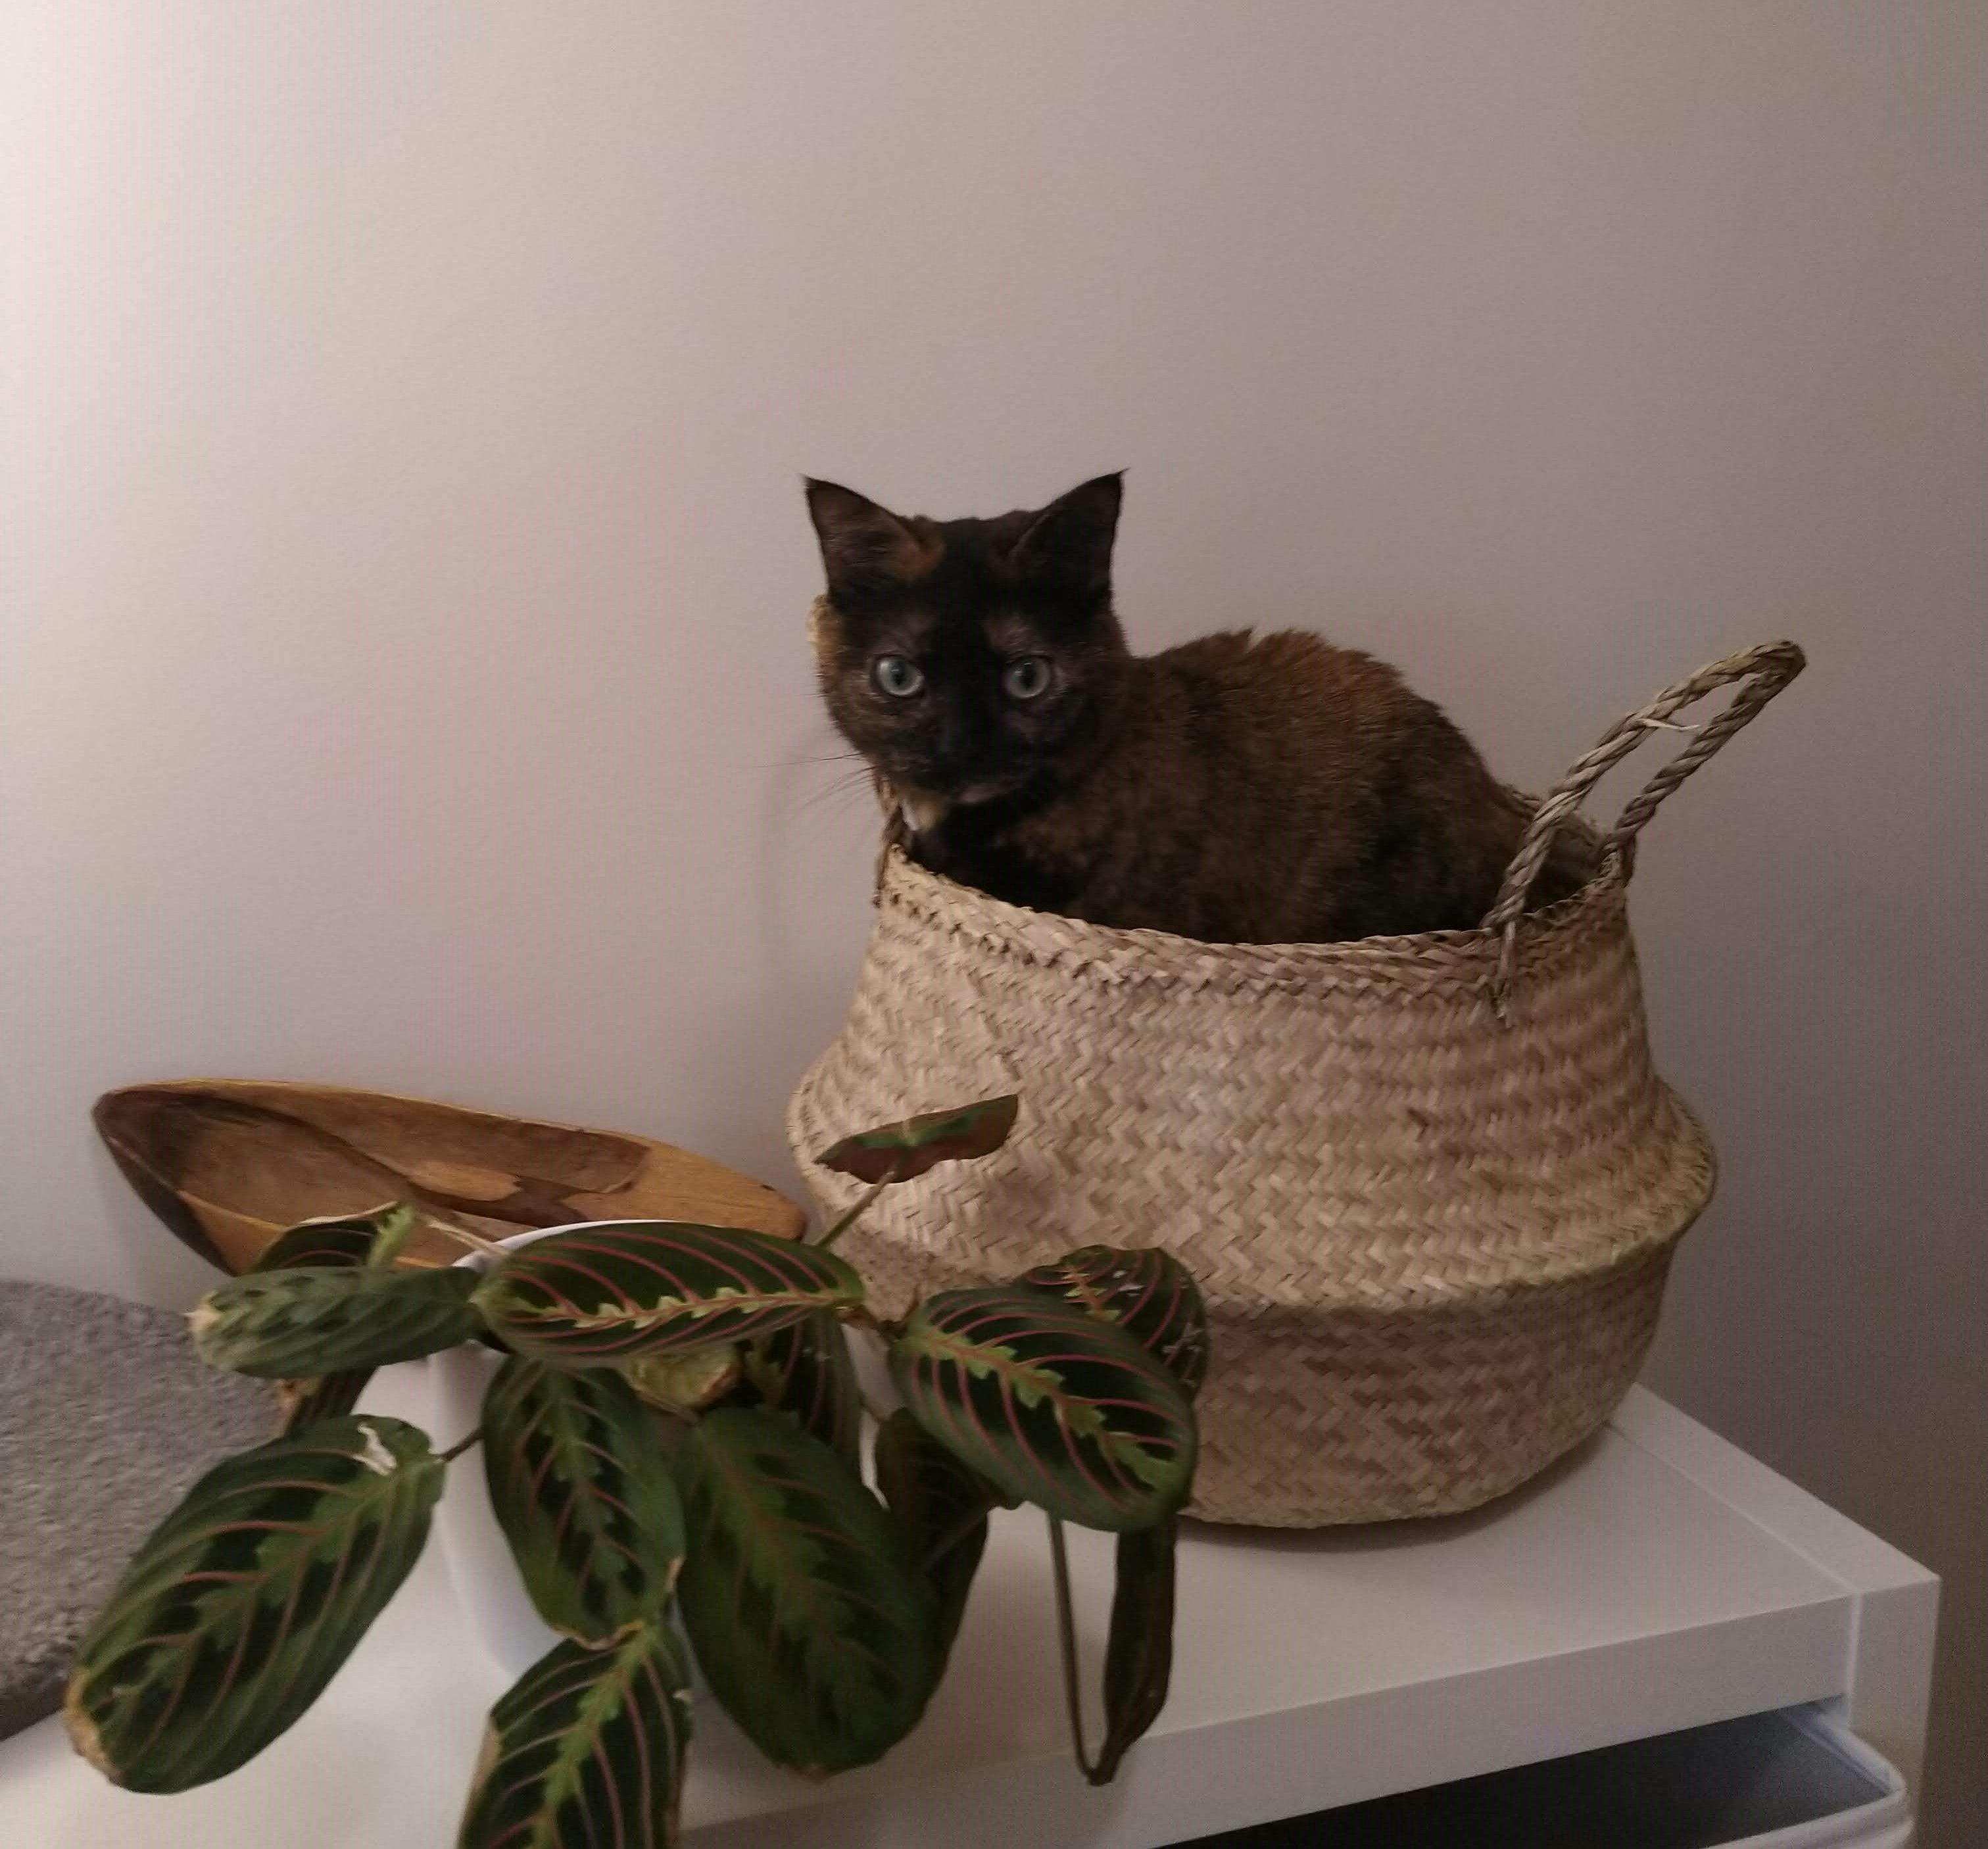 Evey the cat sitting in a basket next to a plant